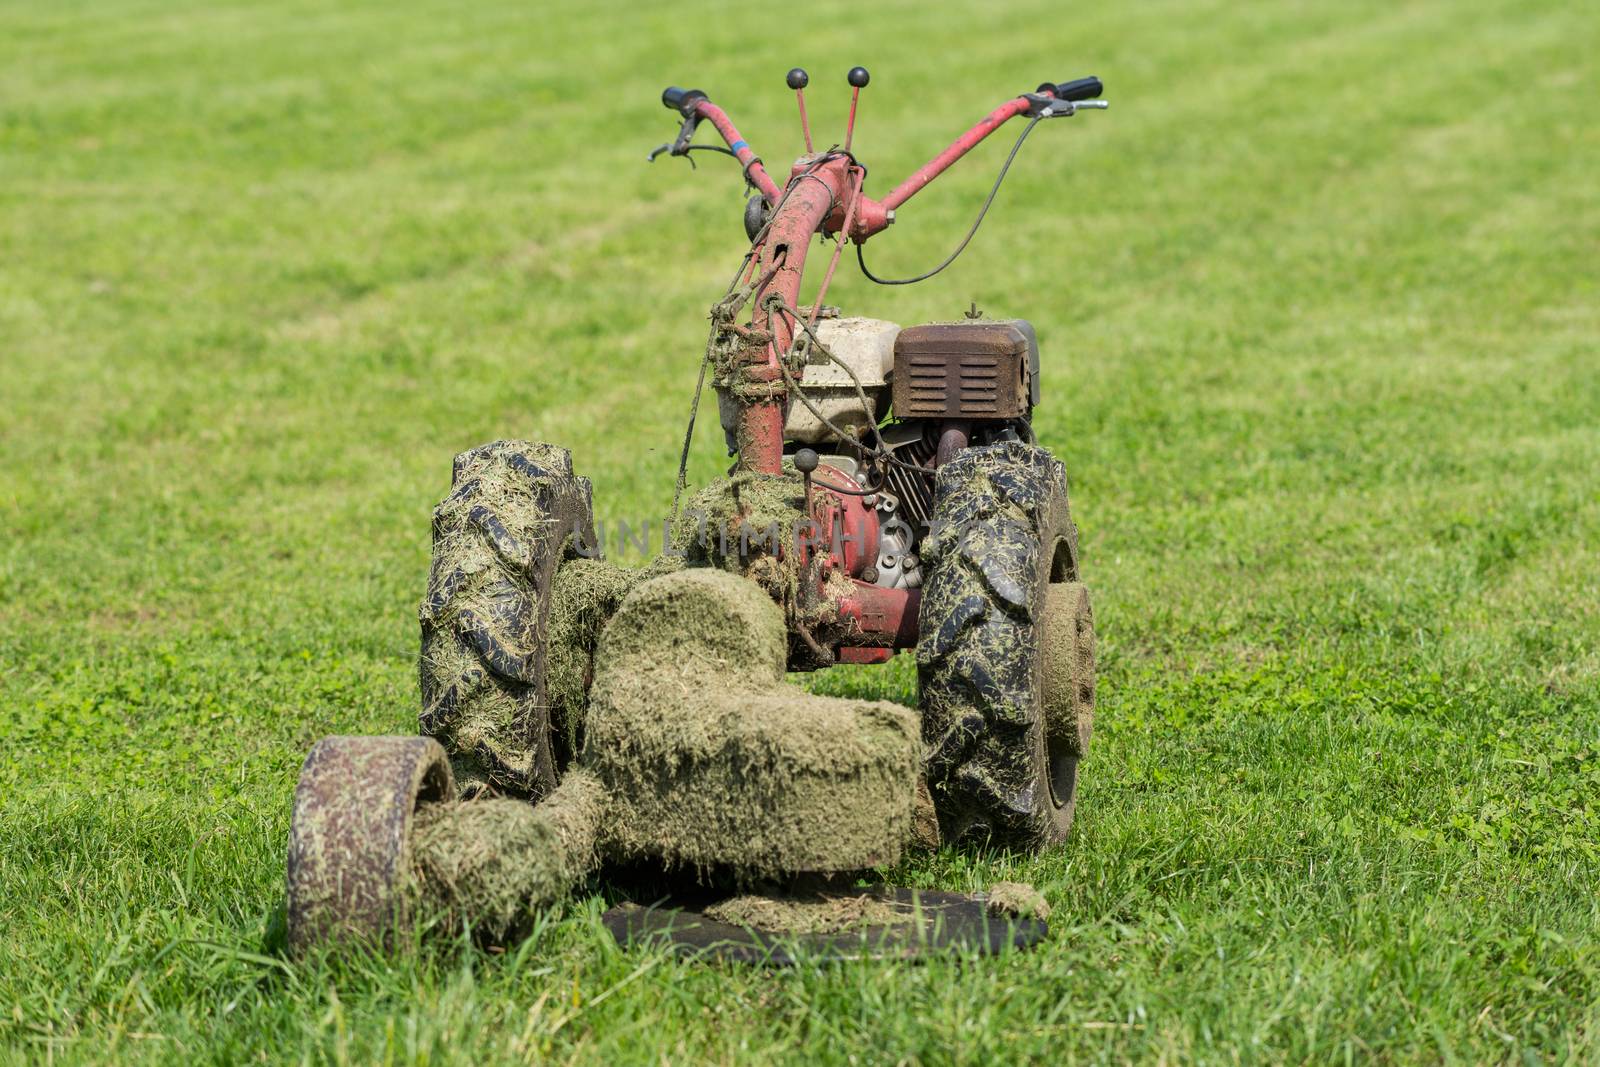 Old Lawn mower use oil in the garden by DGolbay